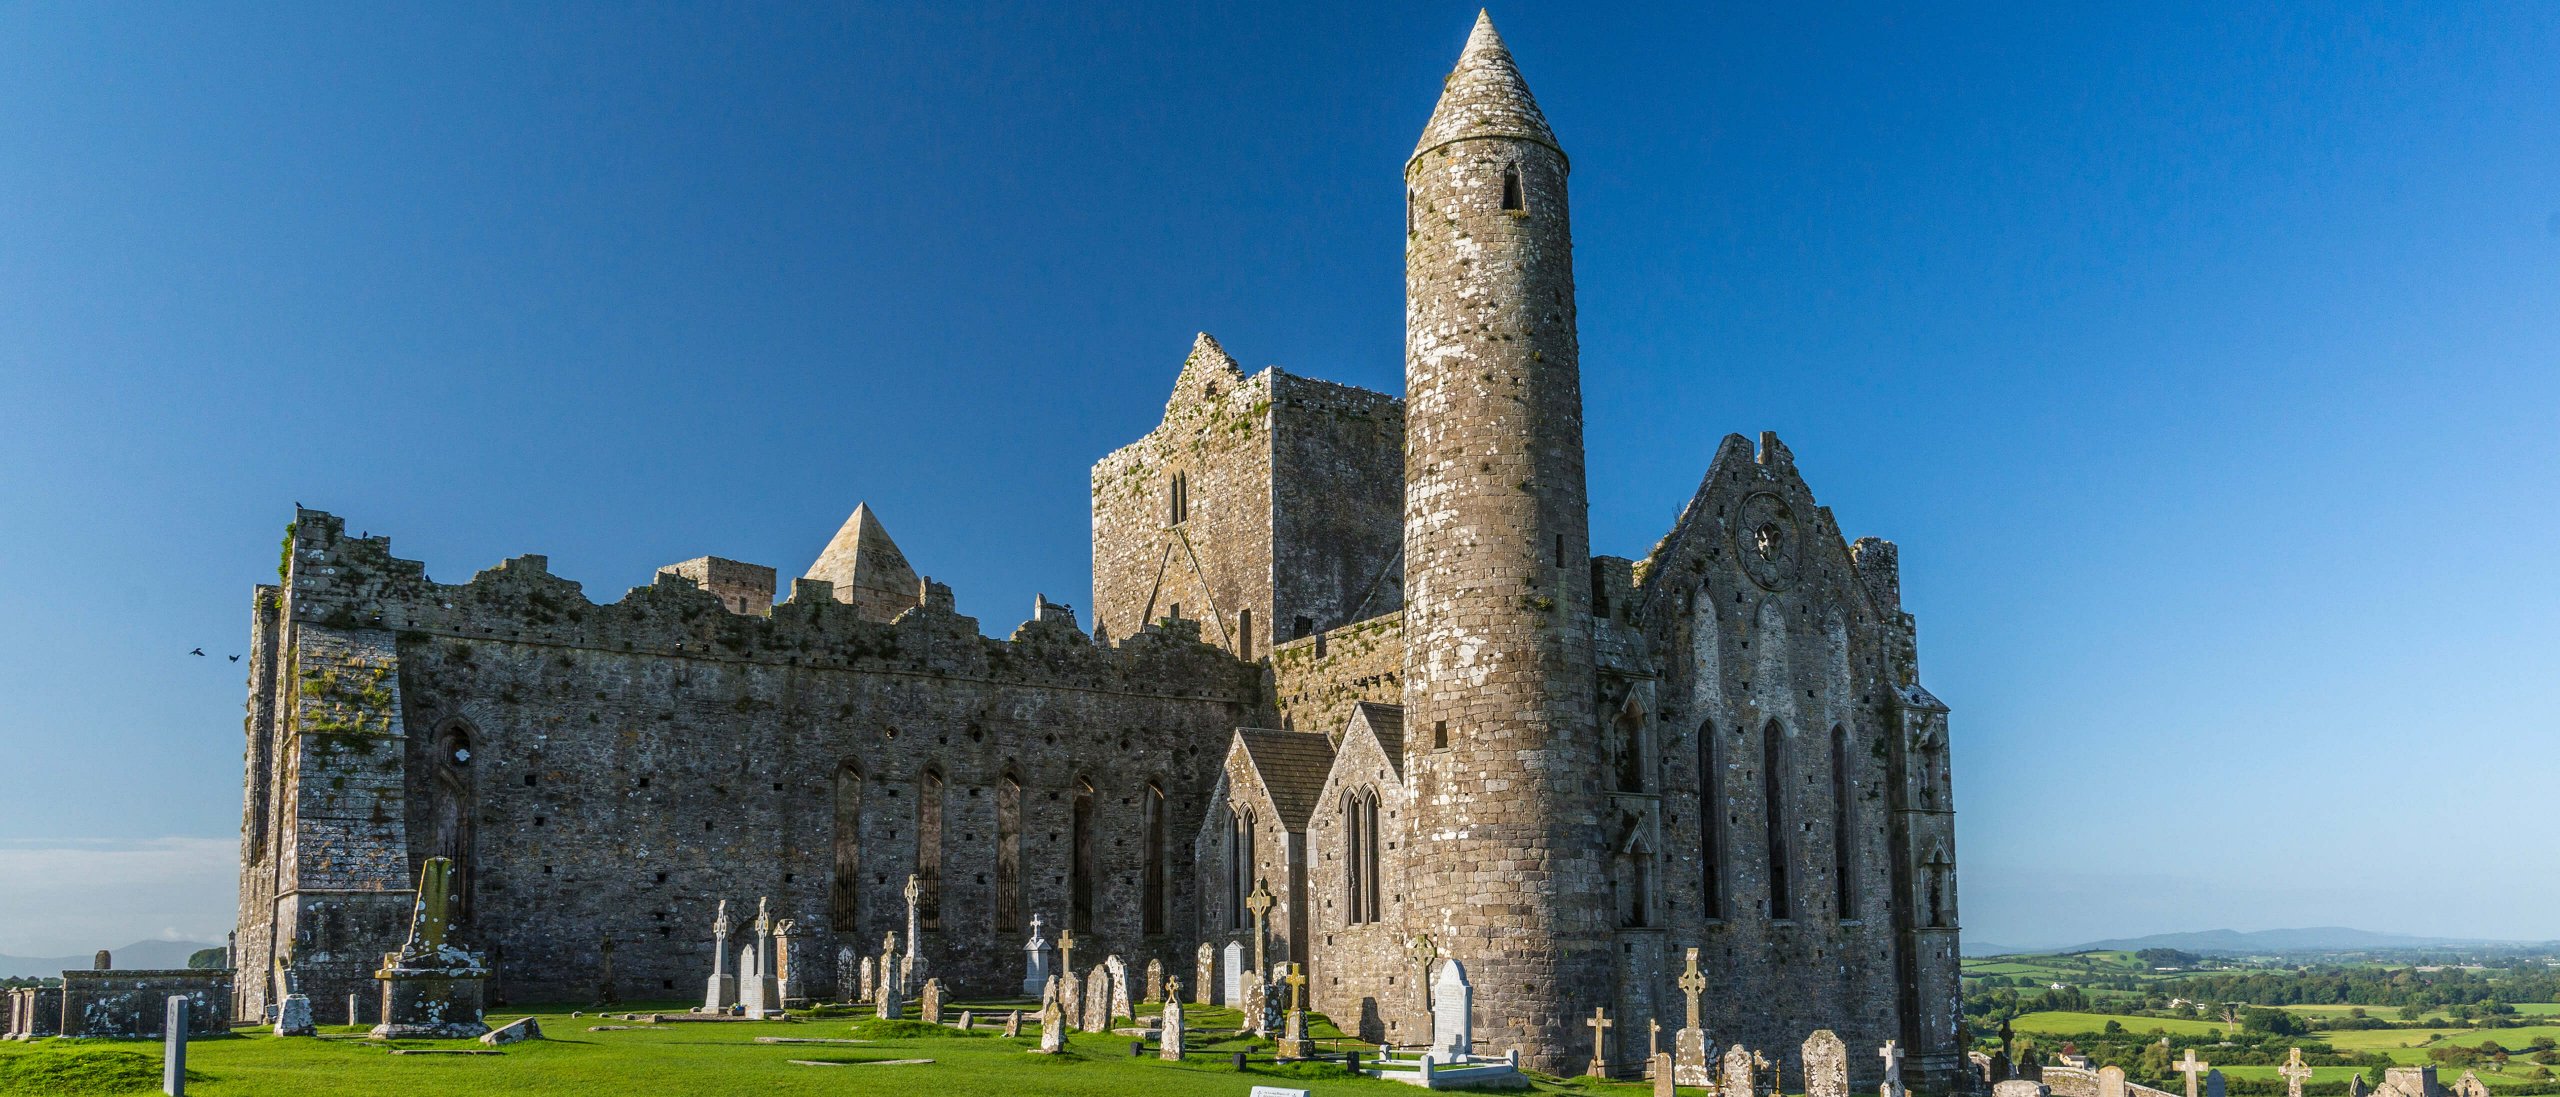 The exterior of the Rock of  Cashel